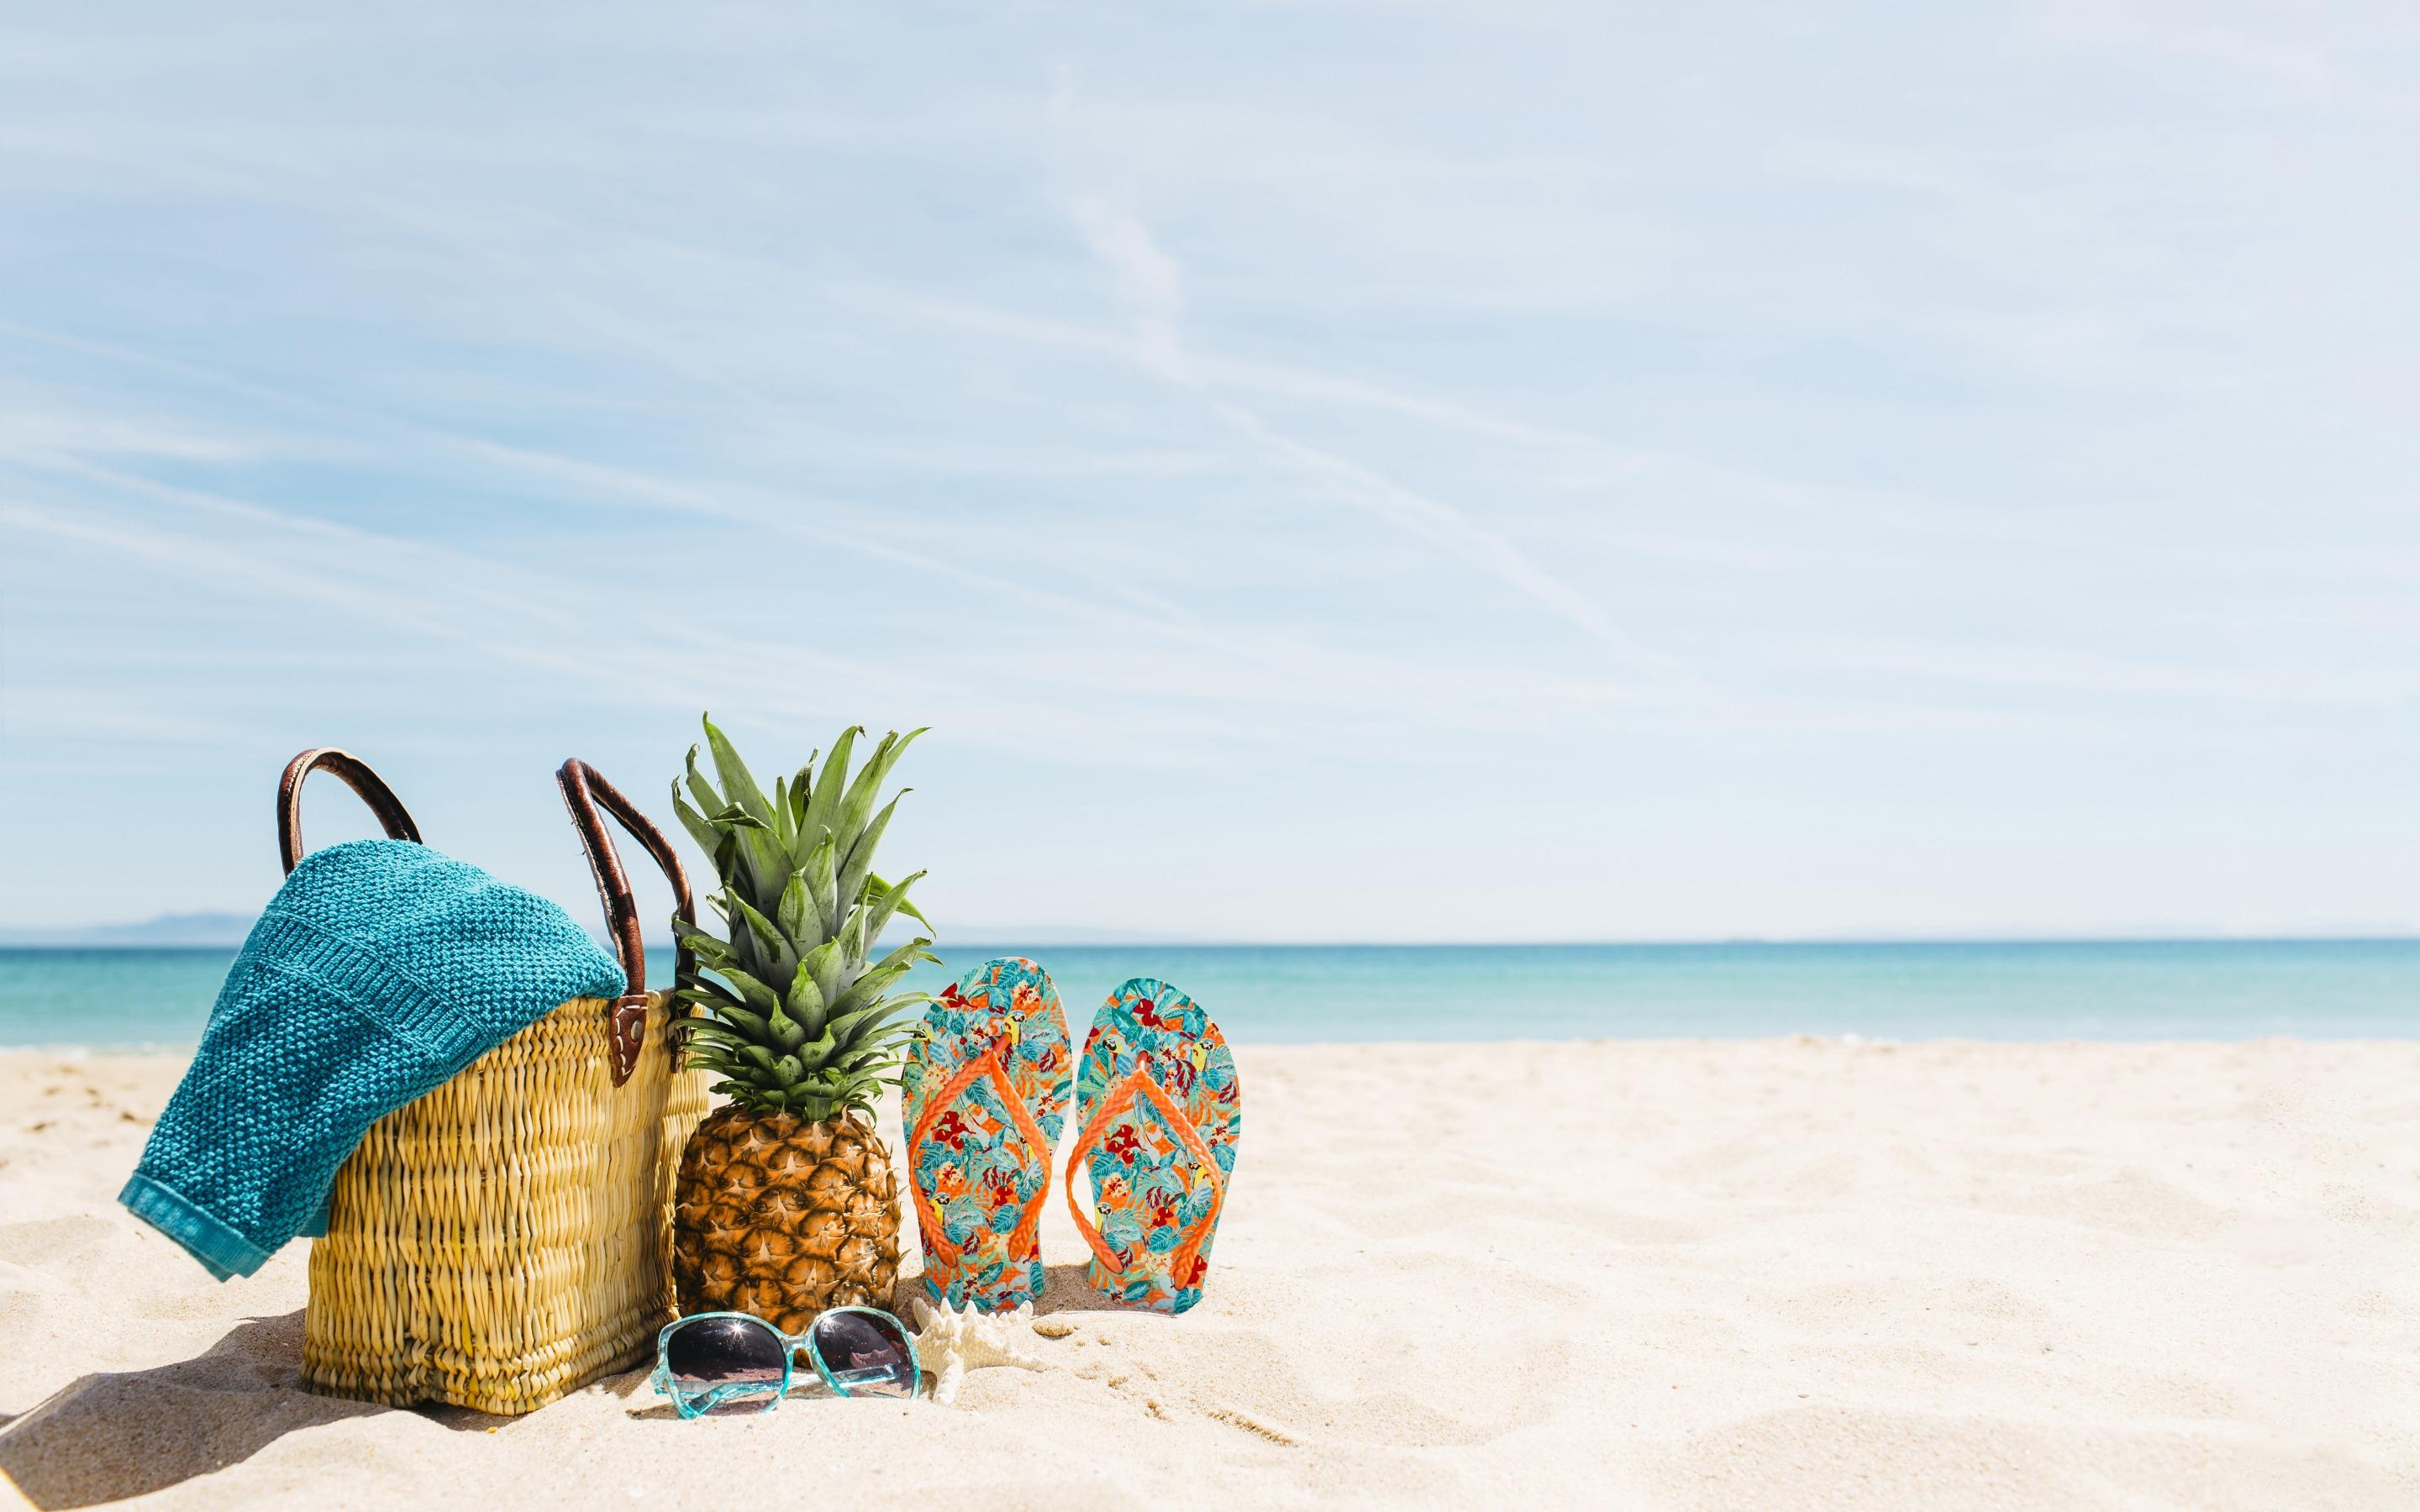 Download wallpaper beach accessories, things, summer, rest